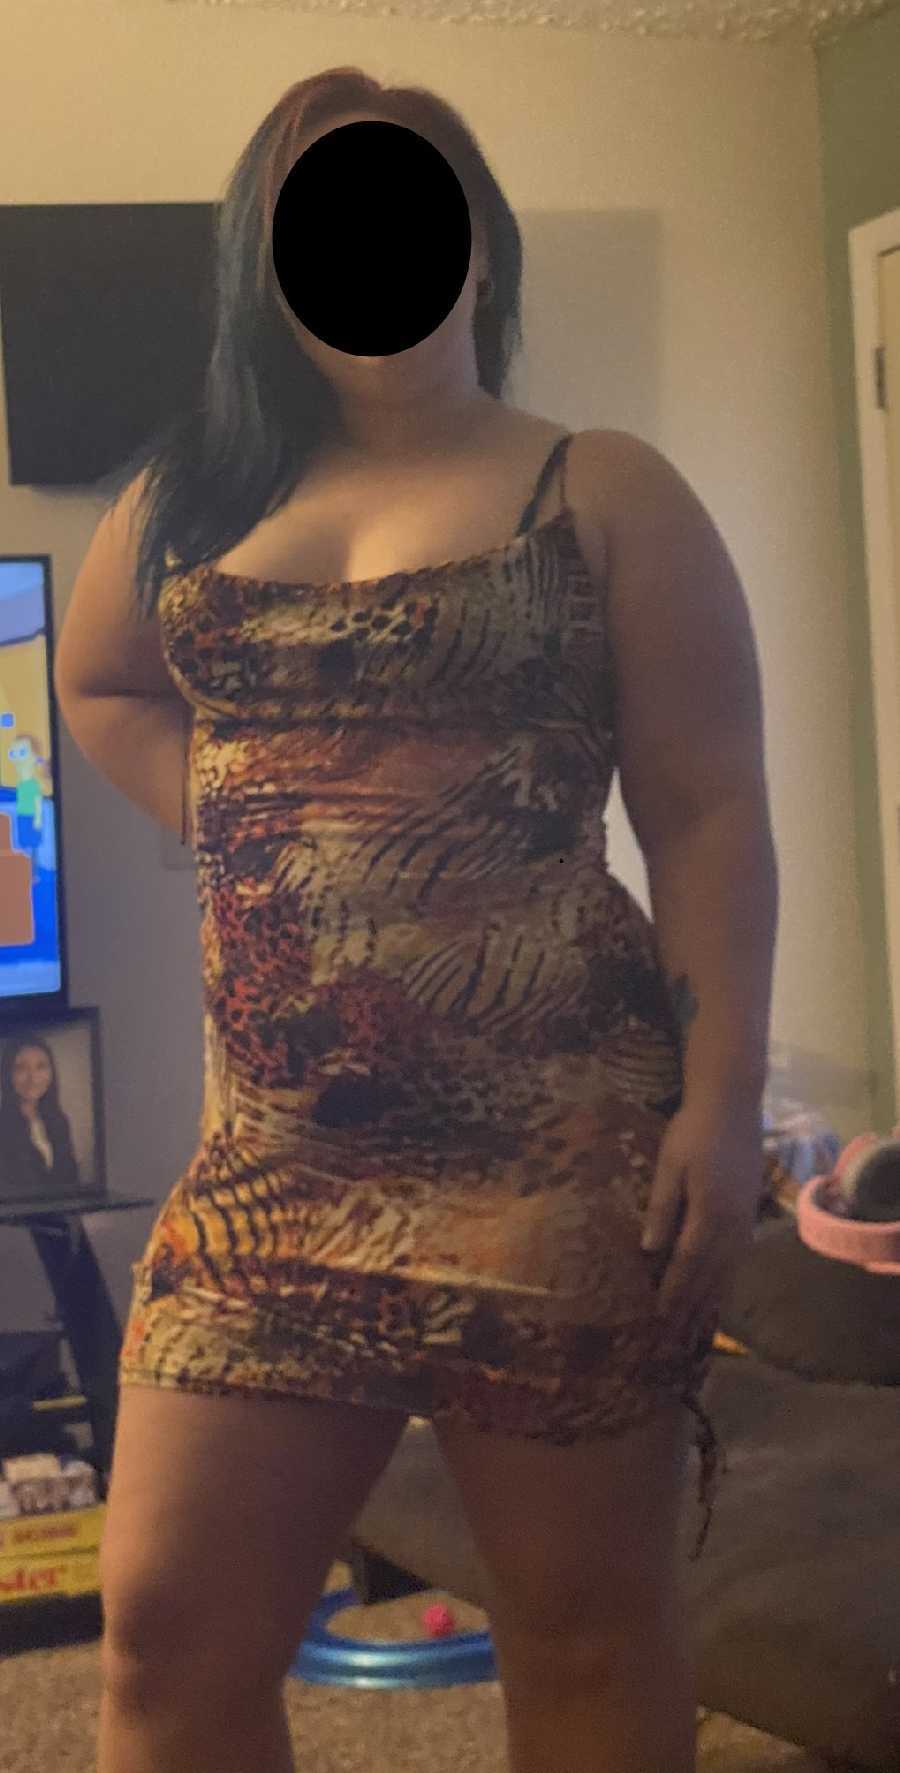 Trying on and taking off Dresses